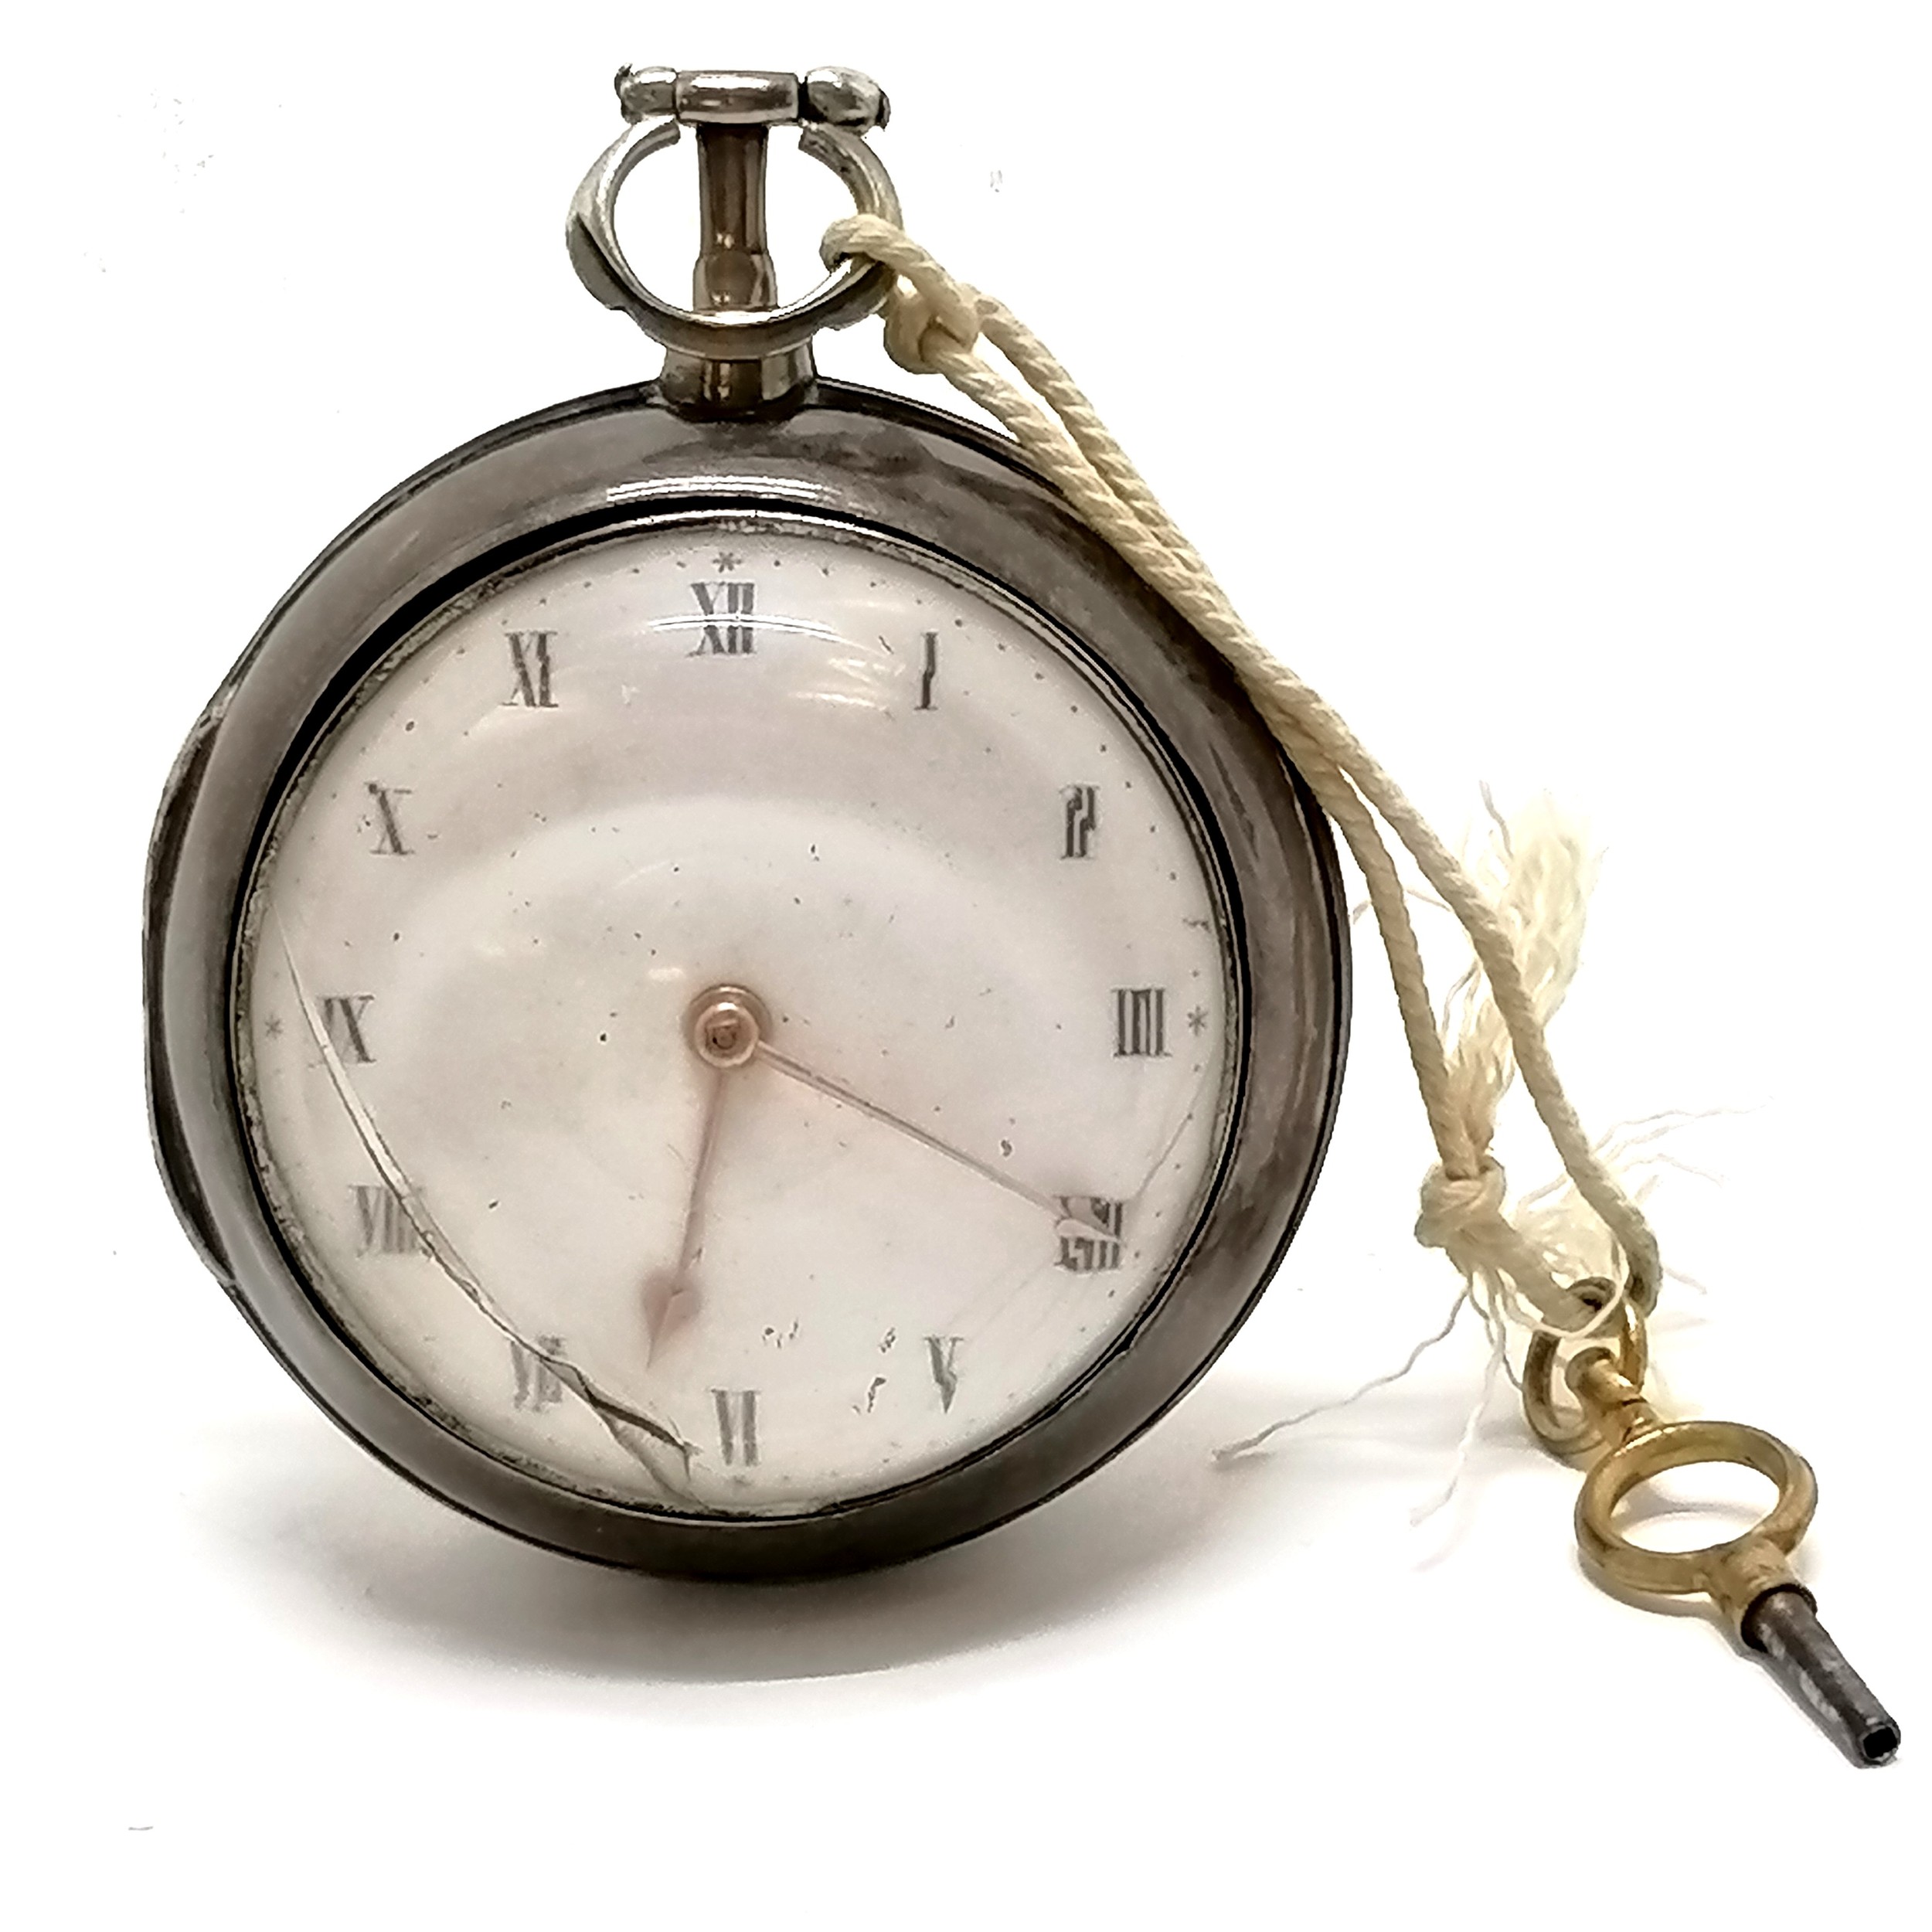 Antique silver pair cased fusee pocket watch - silver 58mm outer case 1799 by John Taylor, has